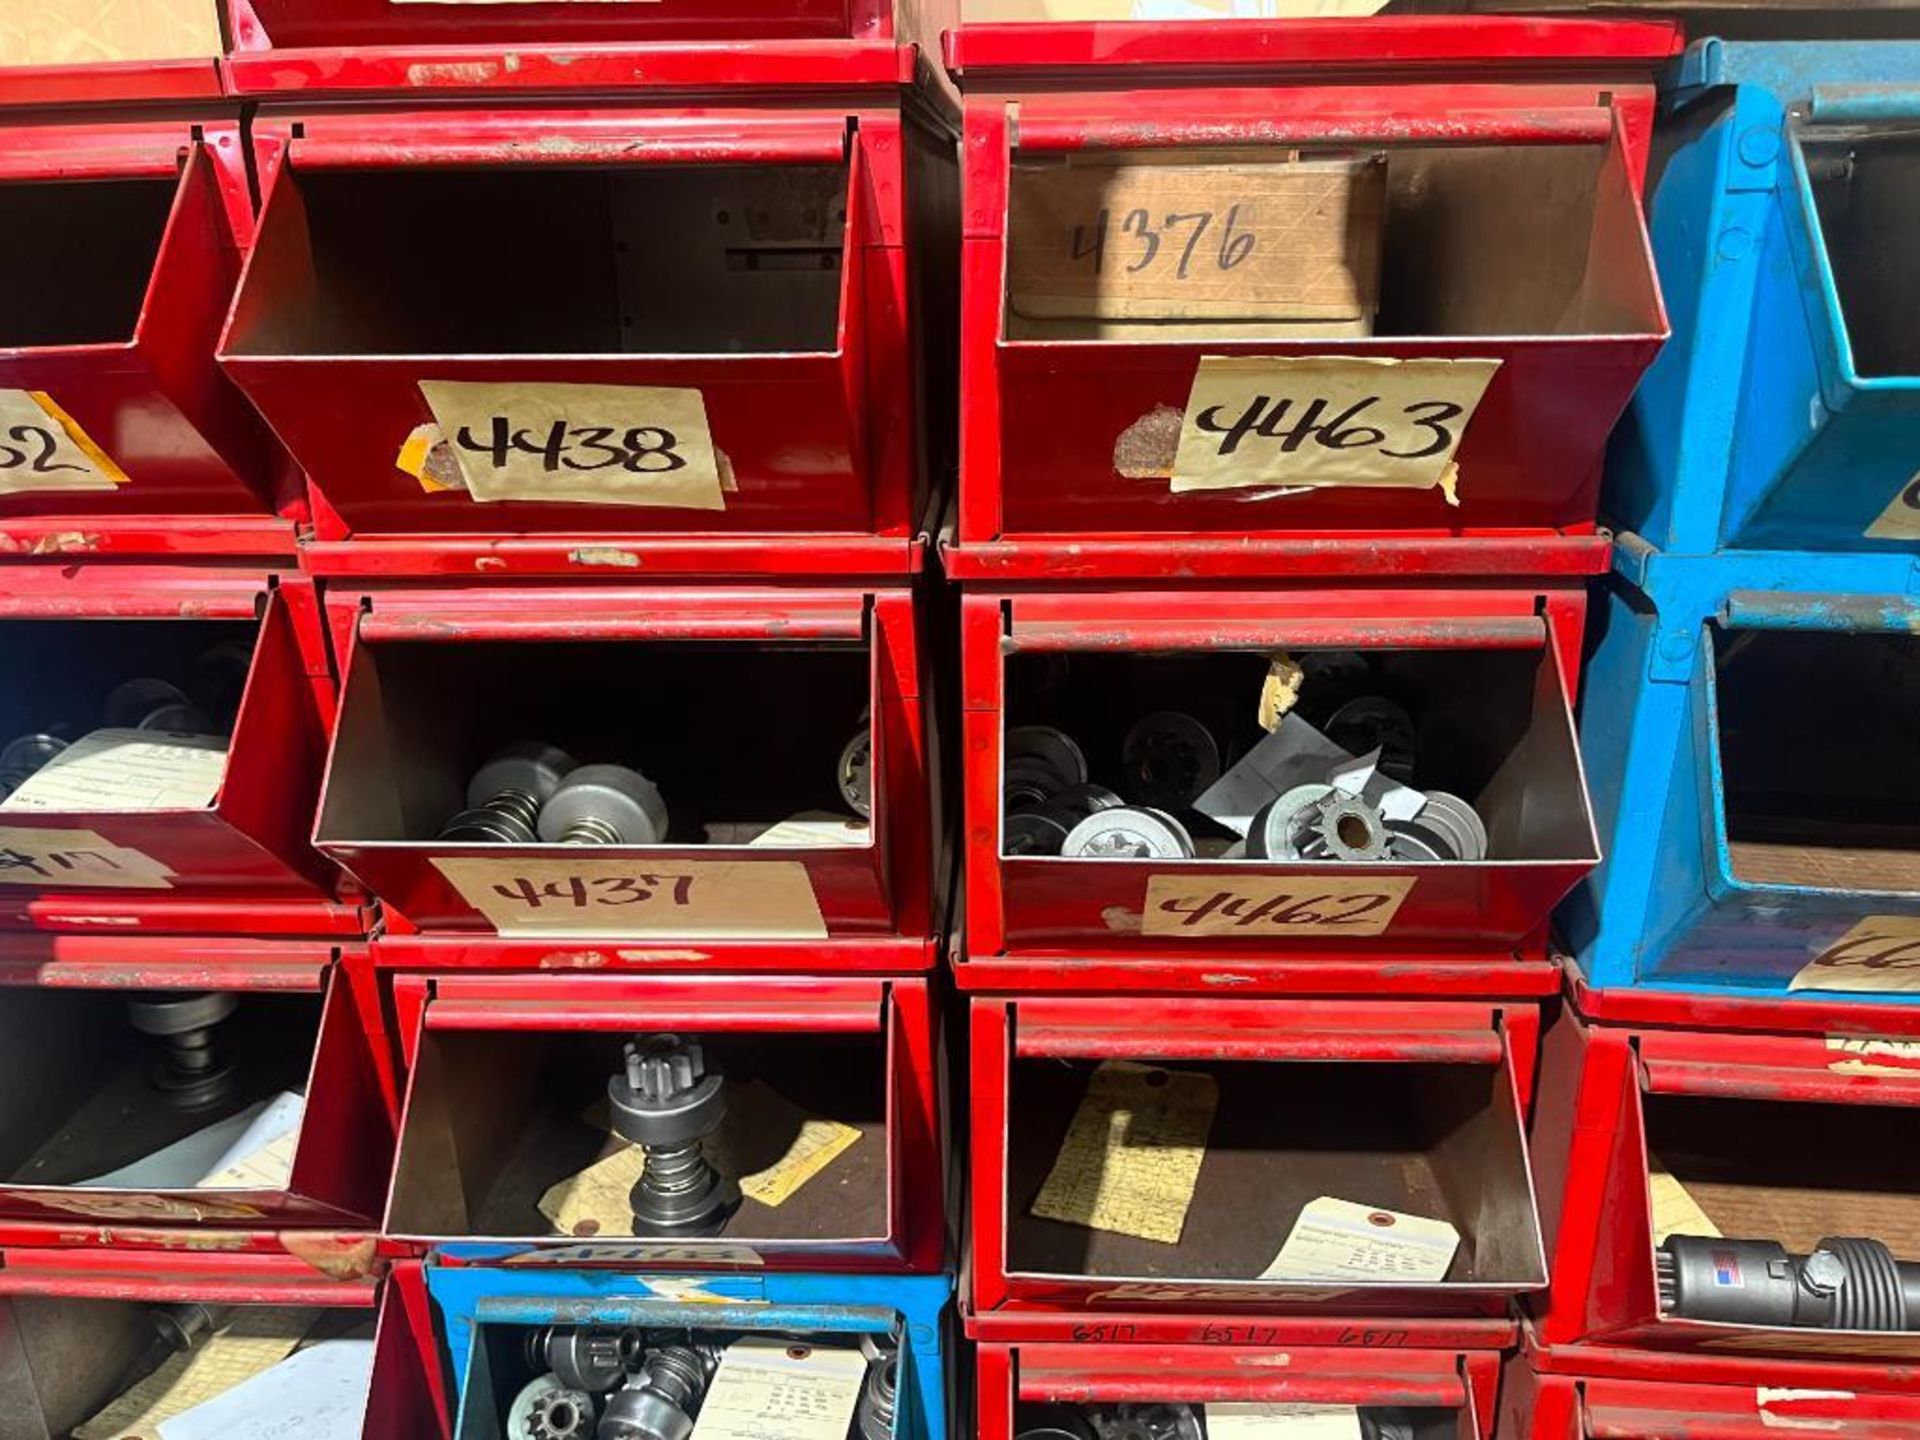 Bins & Shelving Units Including Large Quantity of Assembled Starter Drives, Solenoids, & parts - Image 12 of 77